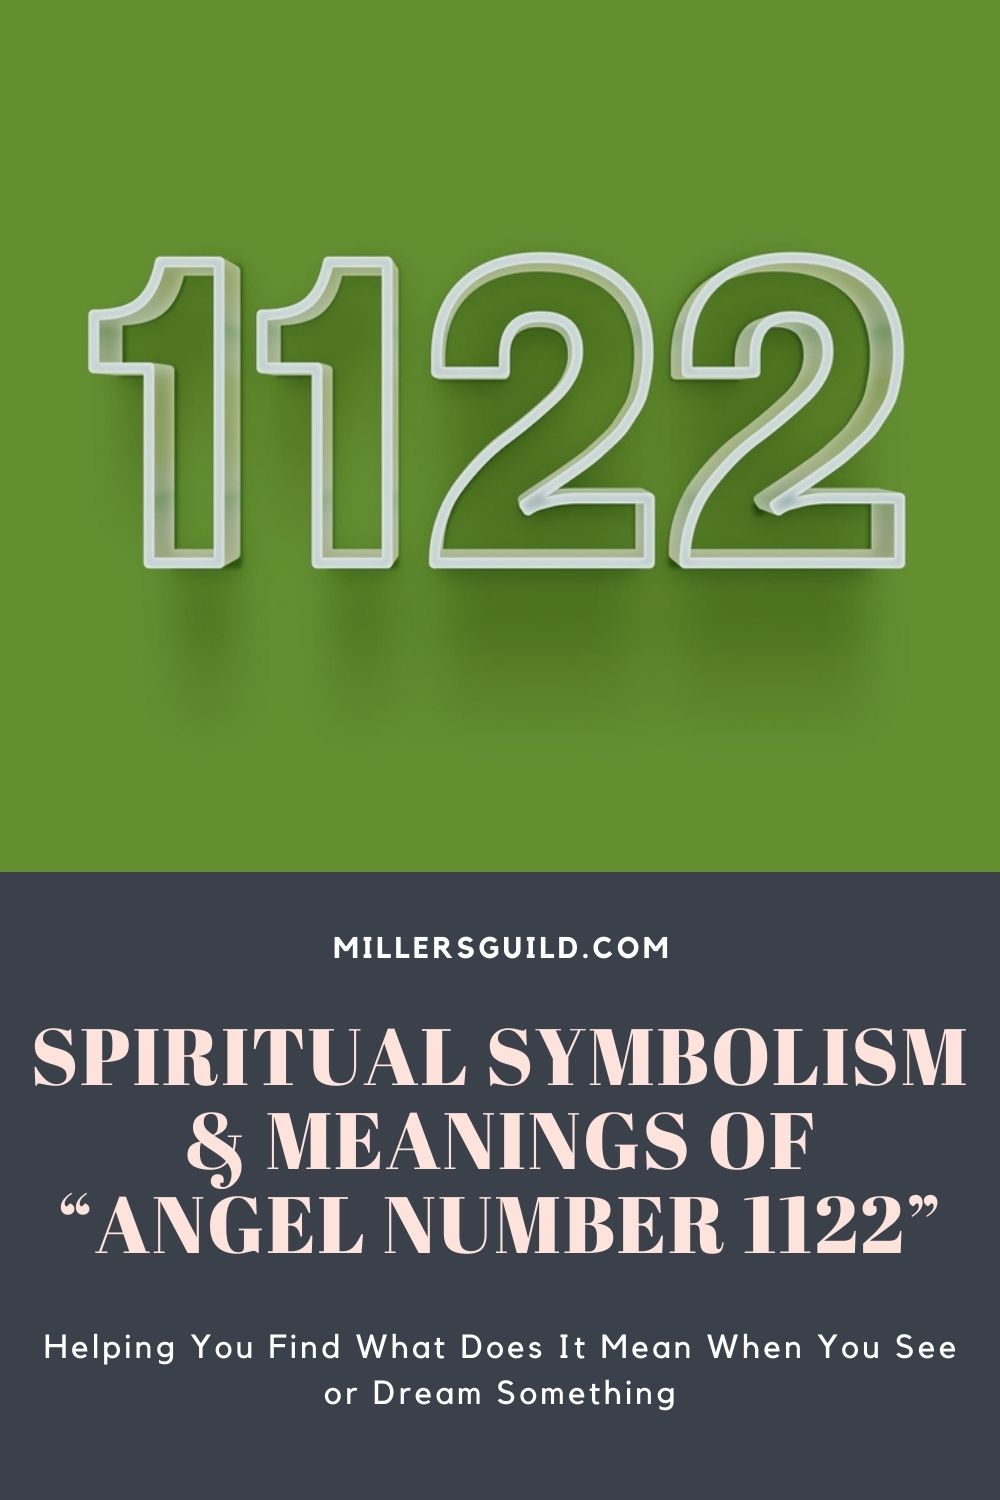 Spiritual Symbolism & Meanings of “Angel Number 1122”（2）